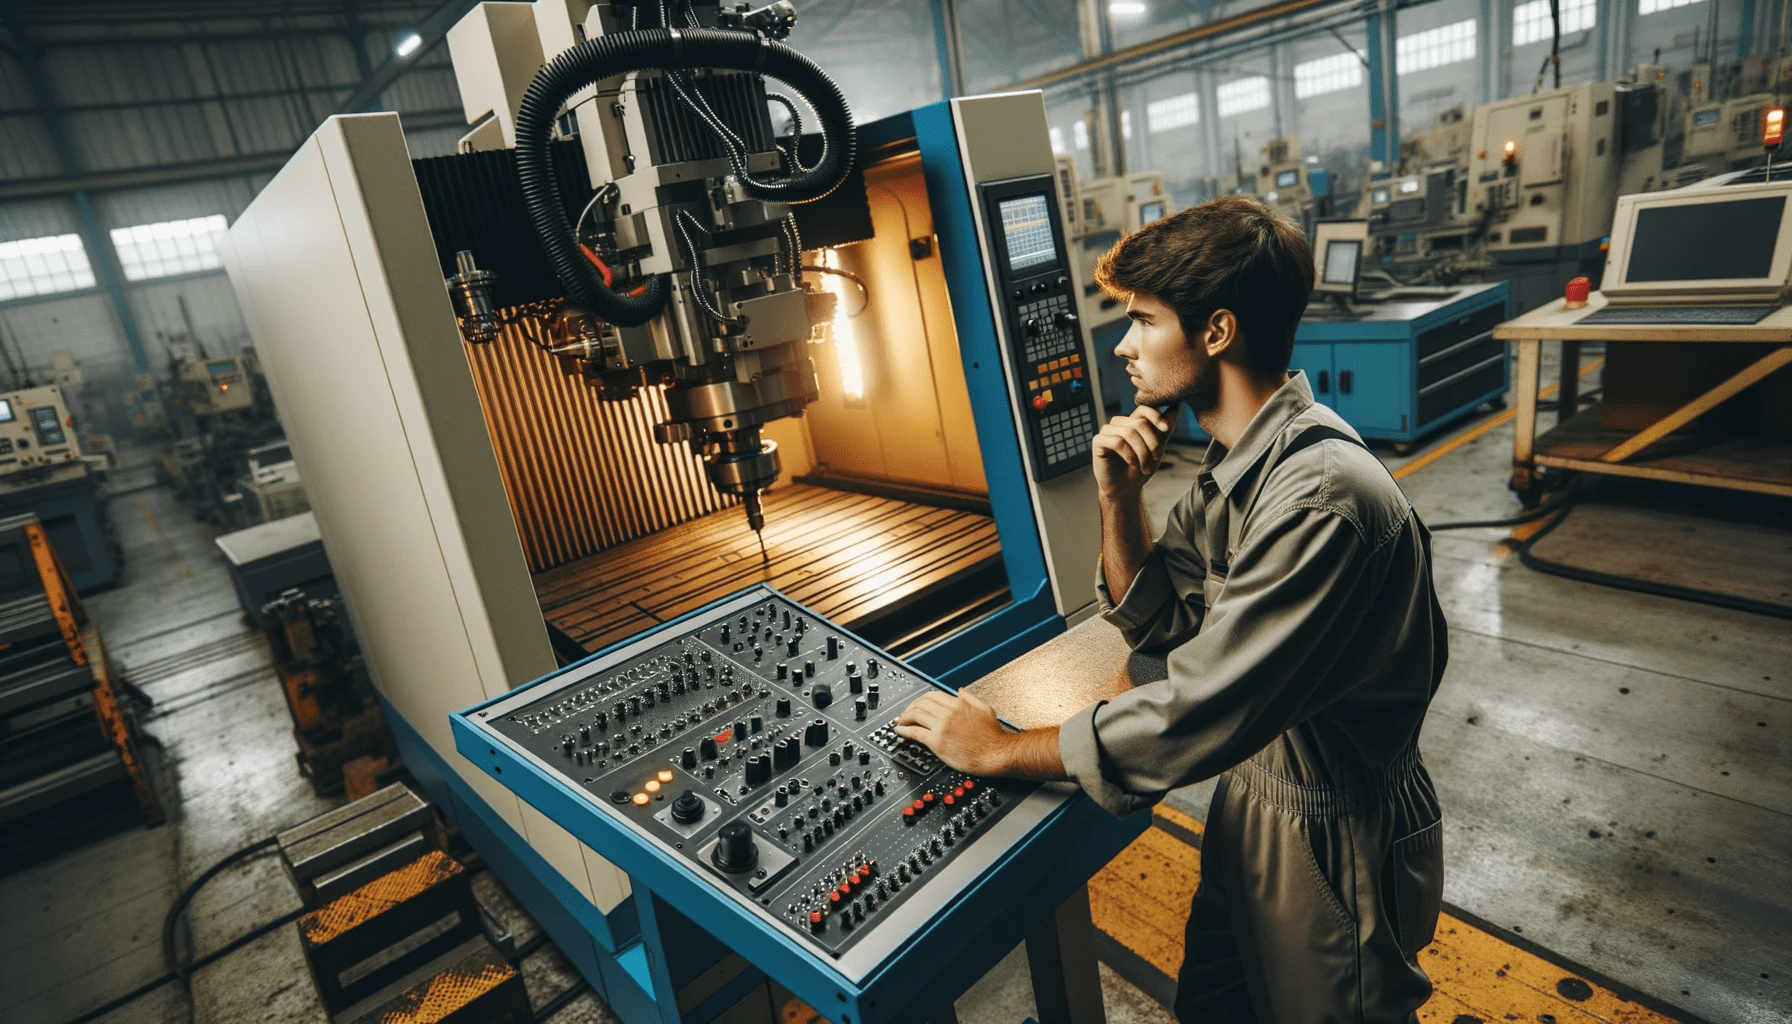 An industrial environment where a man is positioned behind a CNC machine, carefully inspecting its components and operations